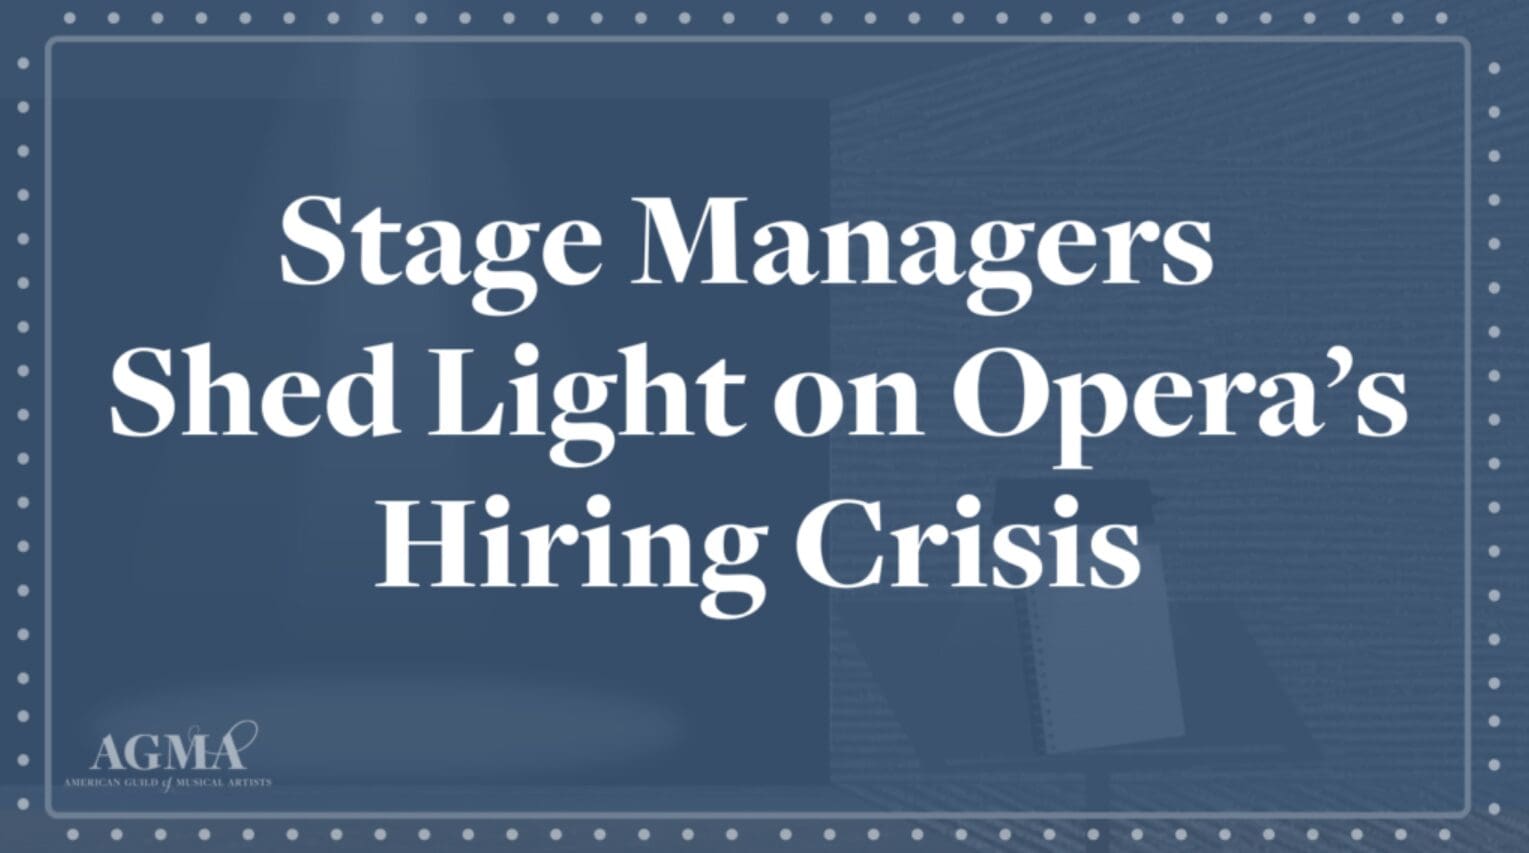 Stage Managers Shed Light on Opera's Hiring Crisis